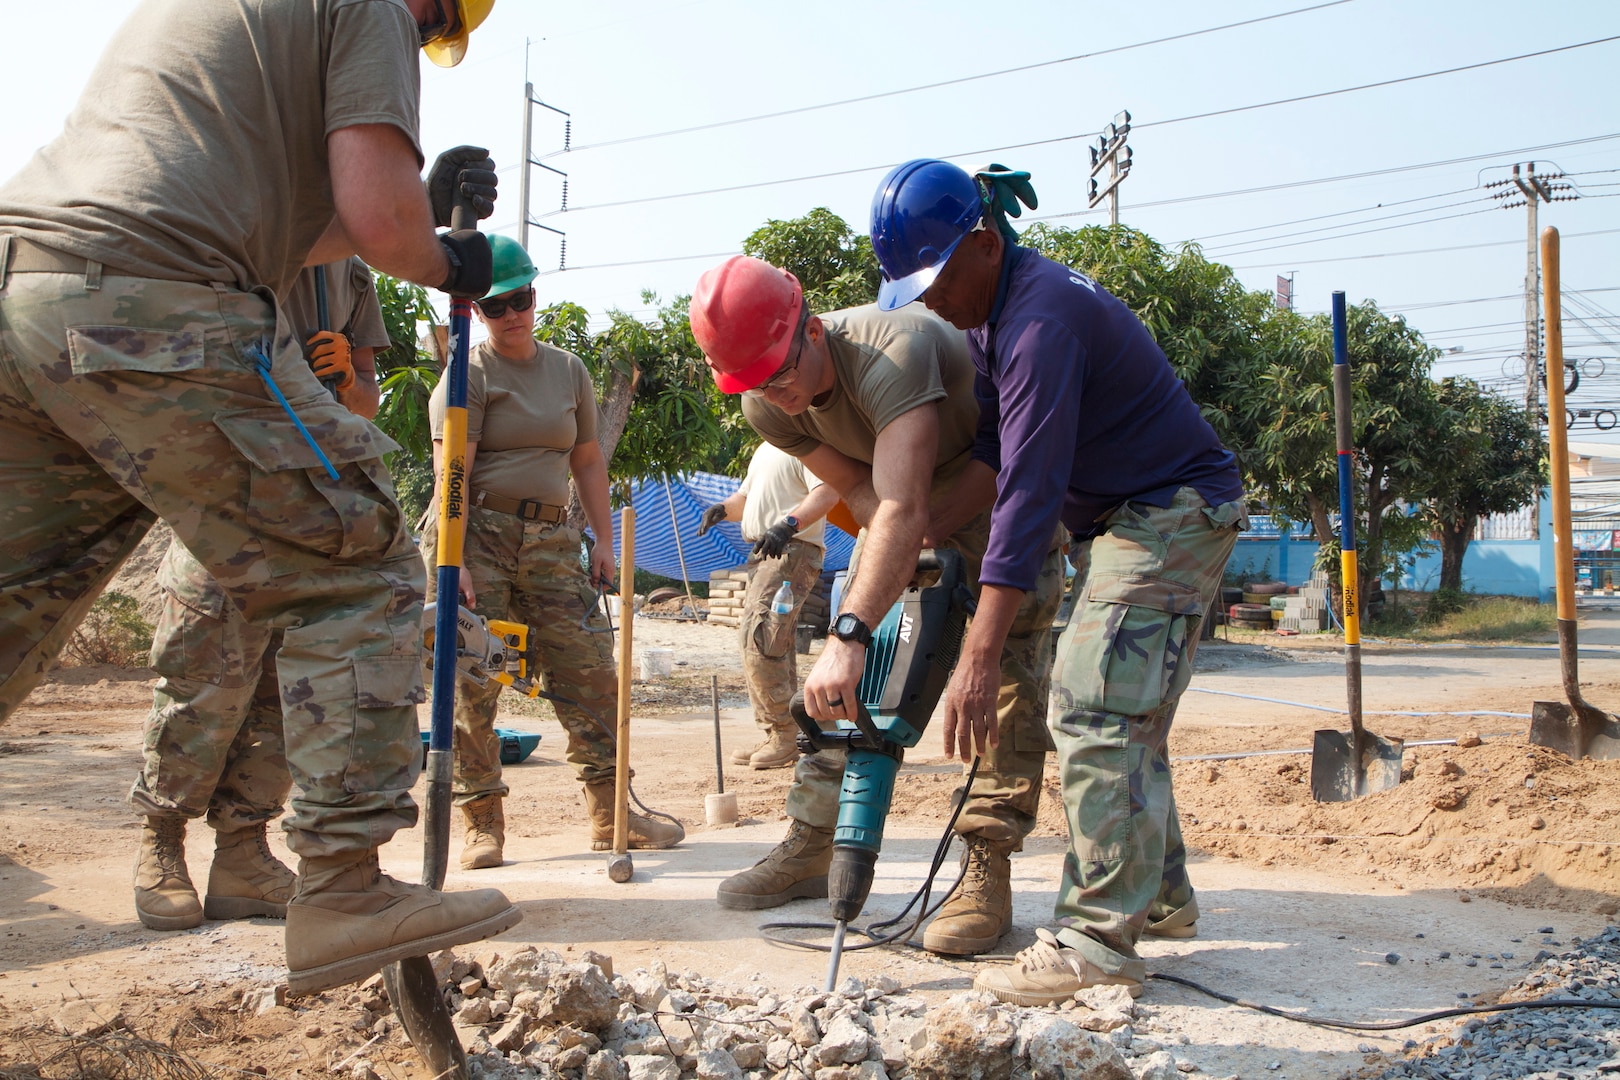 National Guard Soldiers from the 176th Engineering Co., Snohomish, Wash., break up concrete alongside Thai nationals as part of Exercise Cobra Gold in Phitsanulok, Thailand, Feb. 24, 2020. The exercise emphasizes coordination on civic action, developing interoperability and unity of action in crisis contingencies.